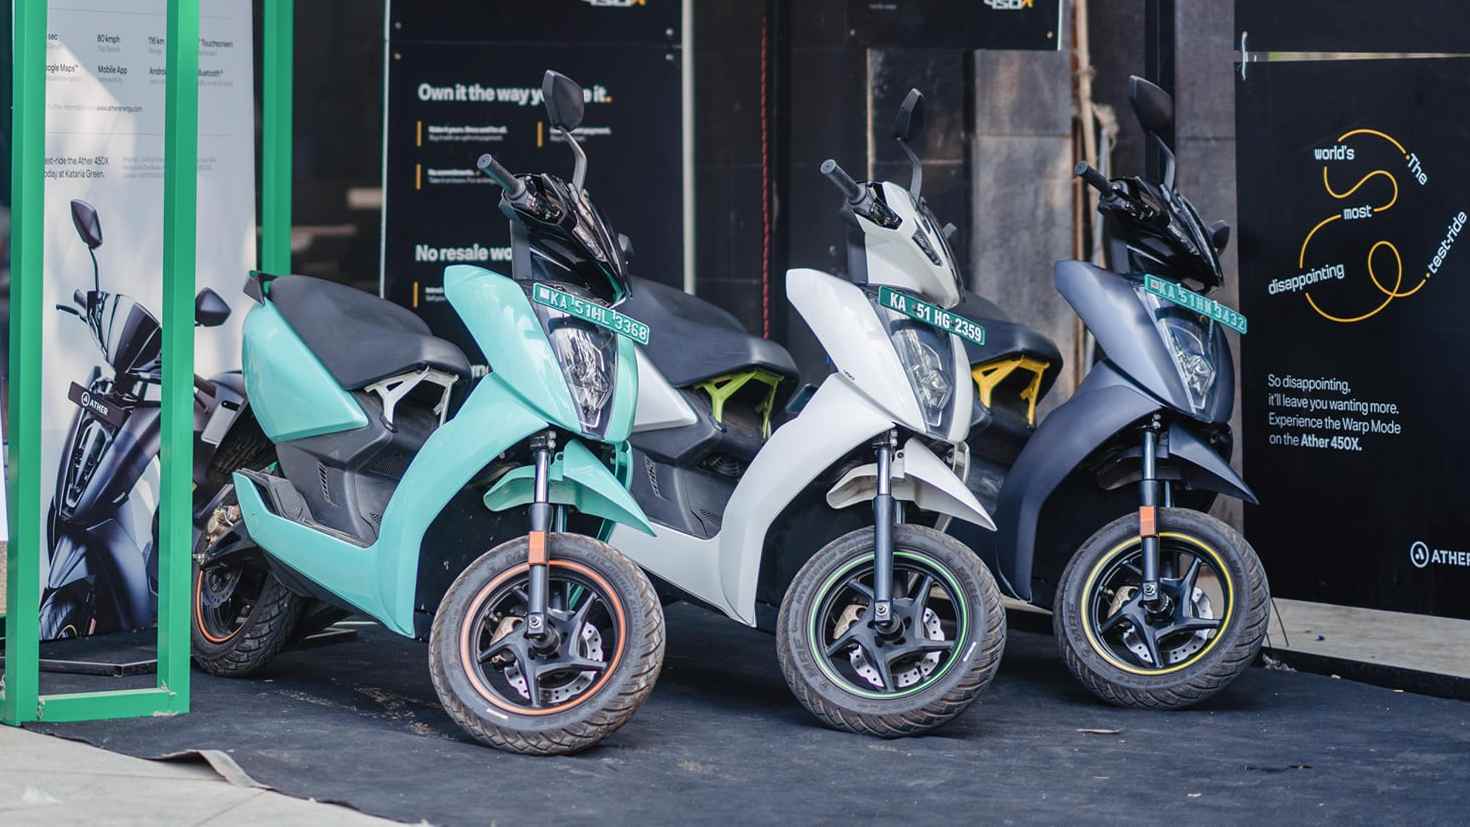 Ather will no longer offer the buyback scheme to new customers from August 2021. Image: Ather Energy